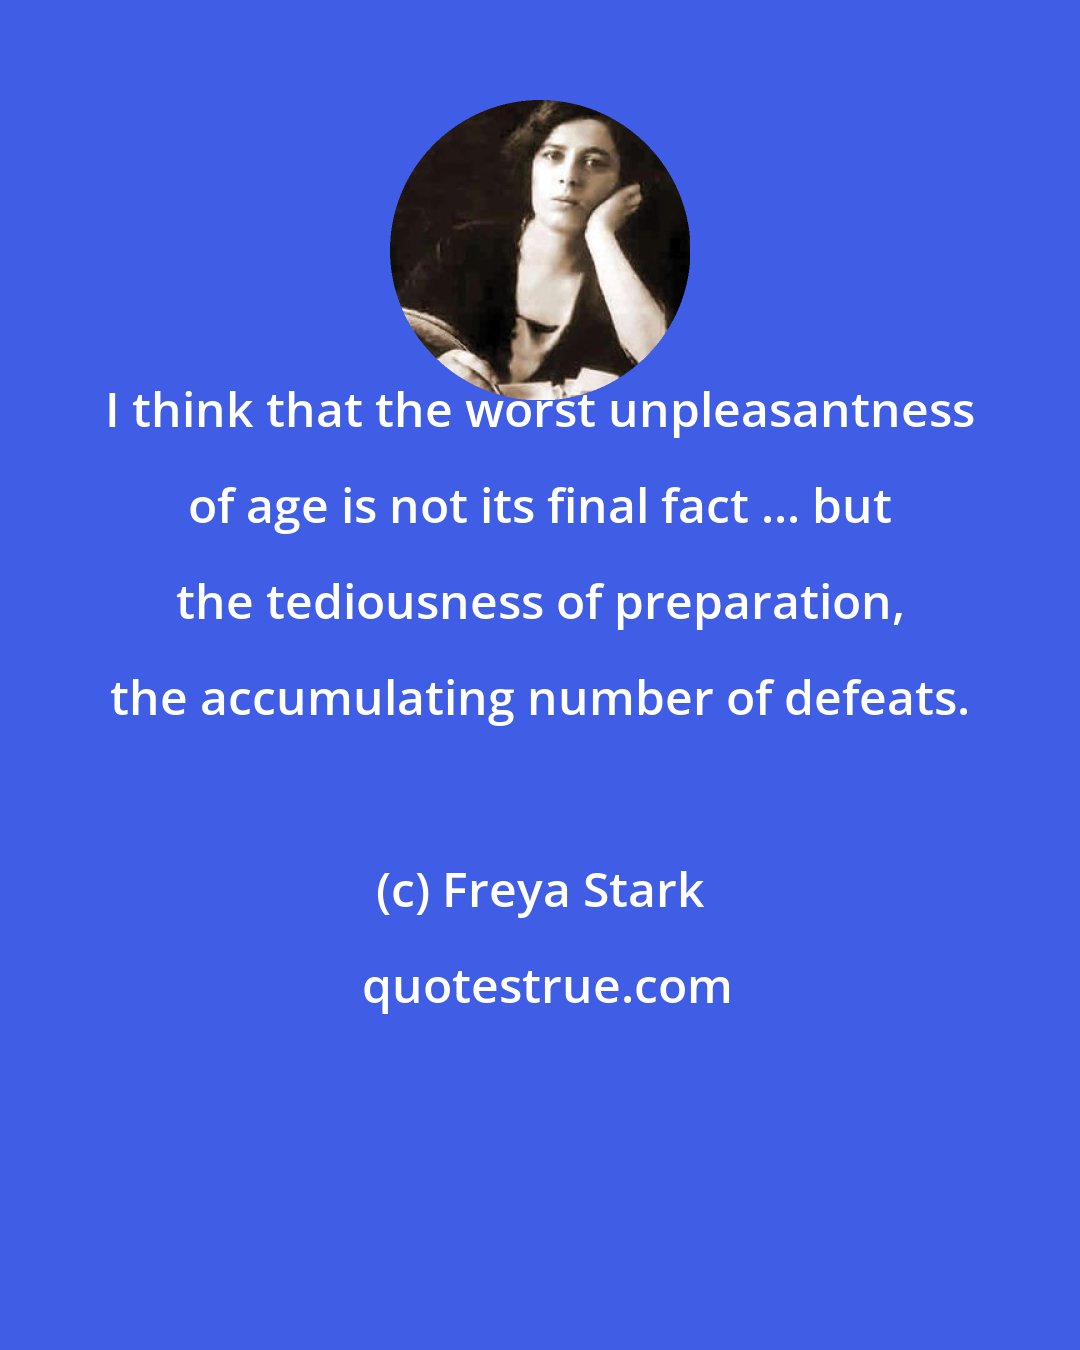 Freya Stark: I think that the worst unpleasantness of age is not its final fact ... but the tediousness of preparation, the accumulating number of defeats.